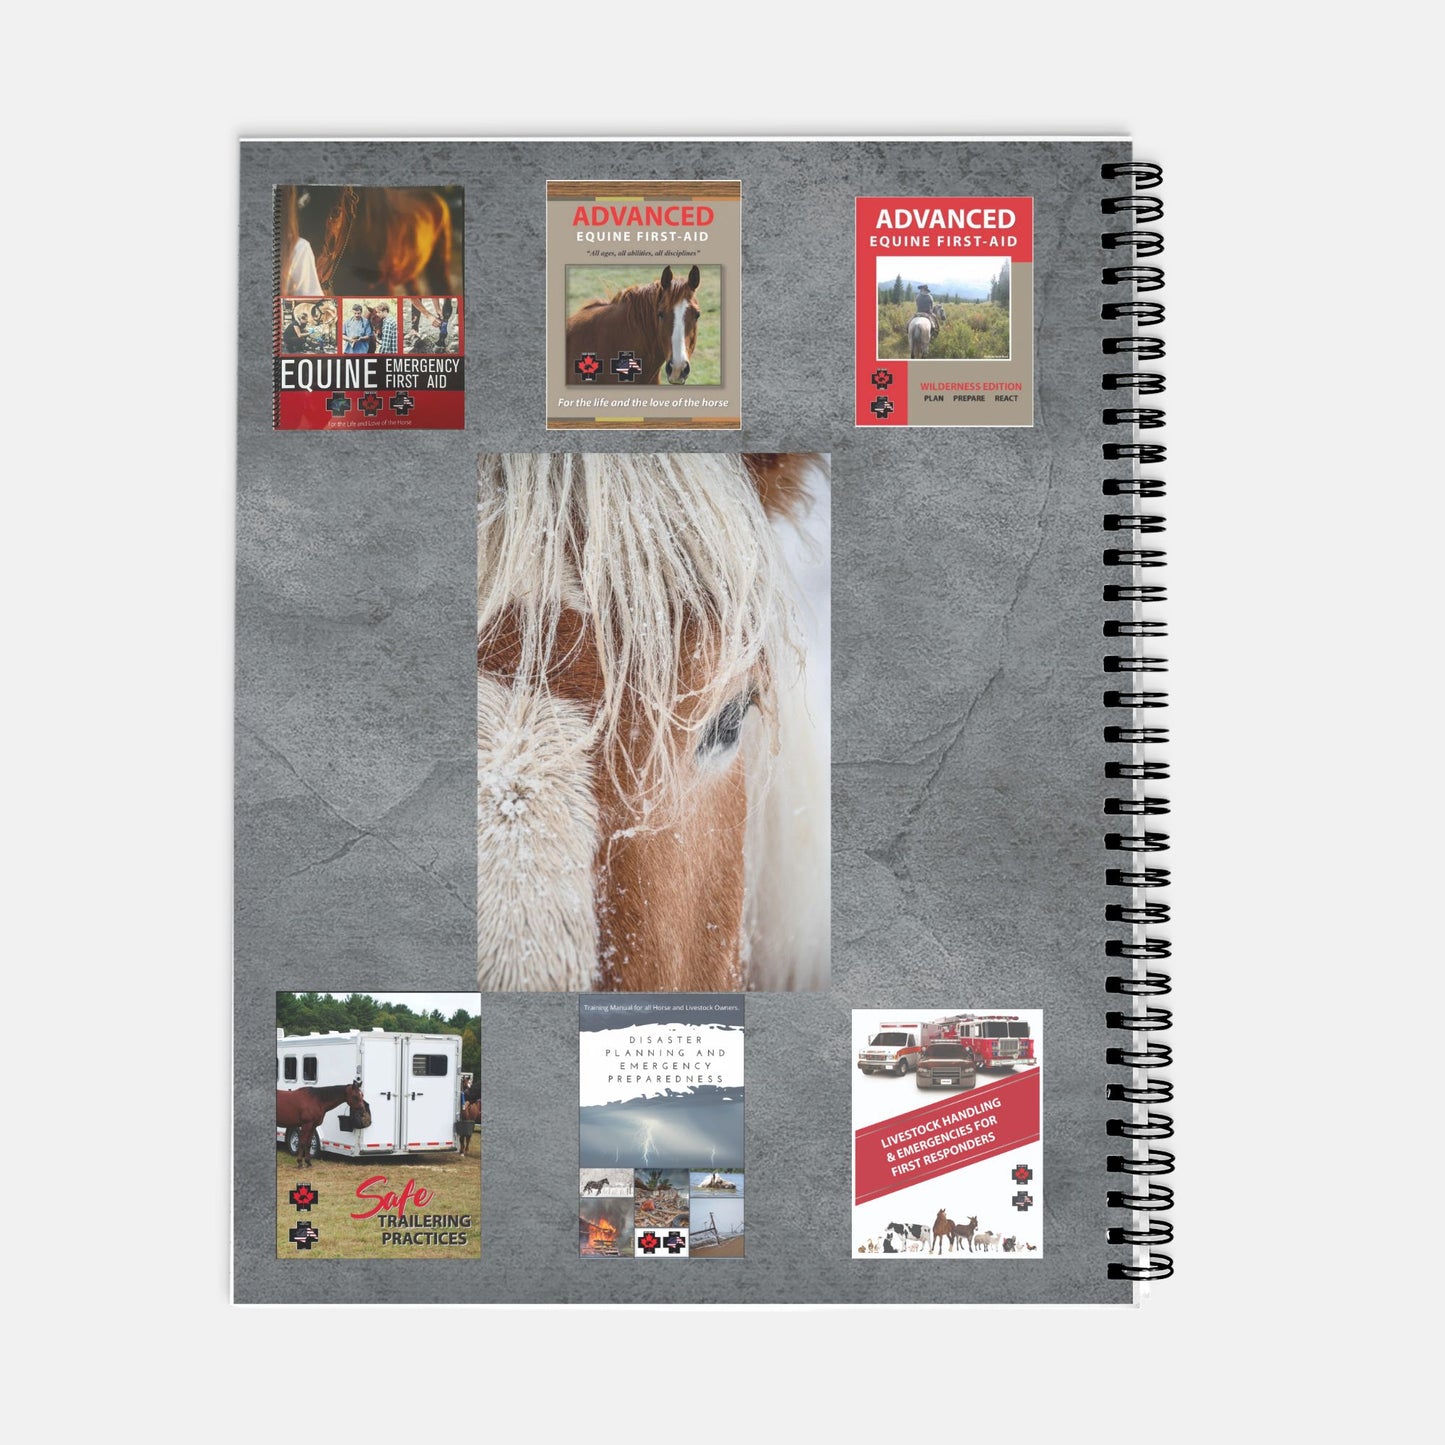 Equi First Aid Planner Hardcover Spiral 8.5 x 11